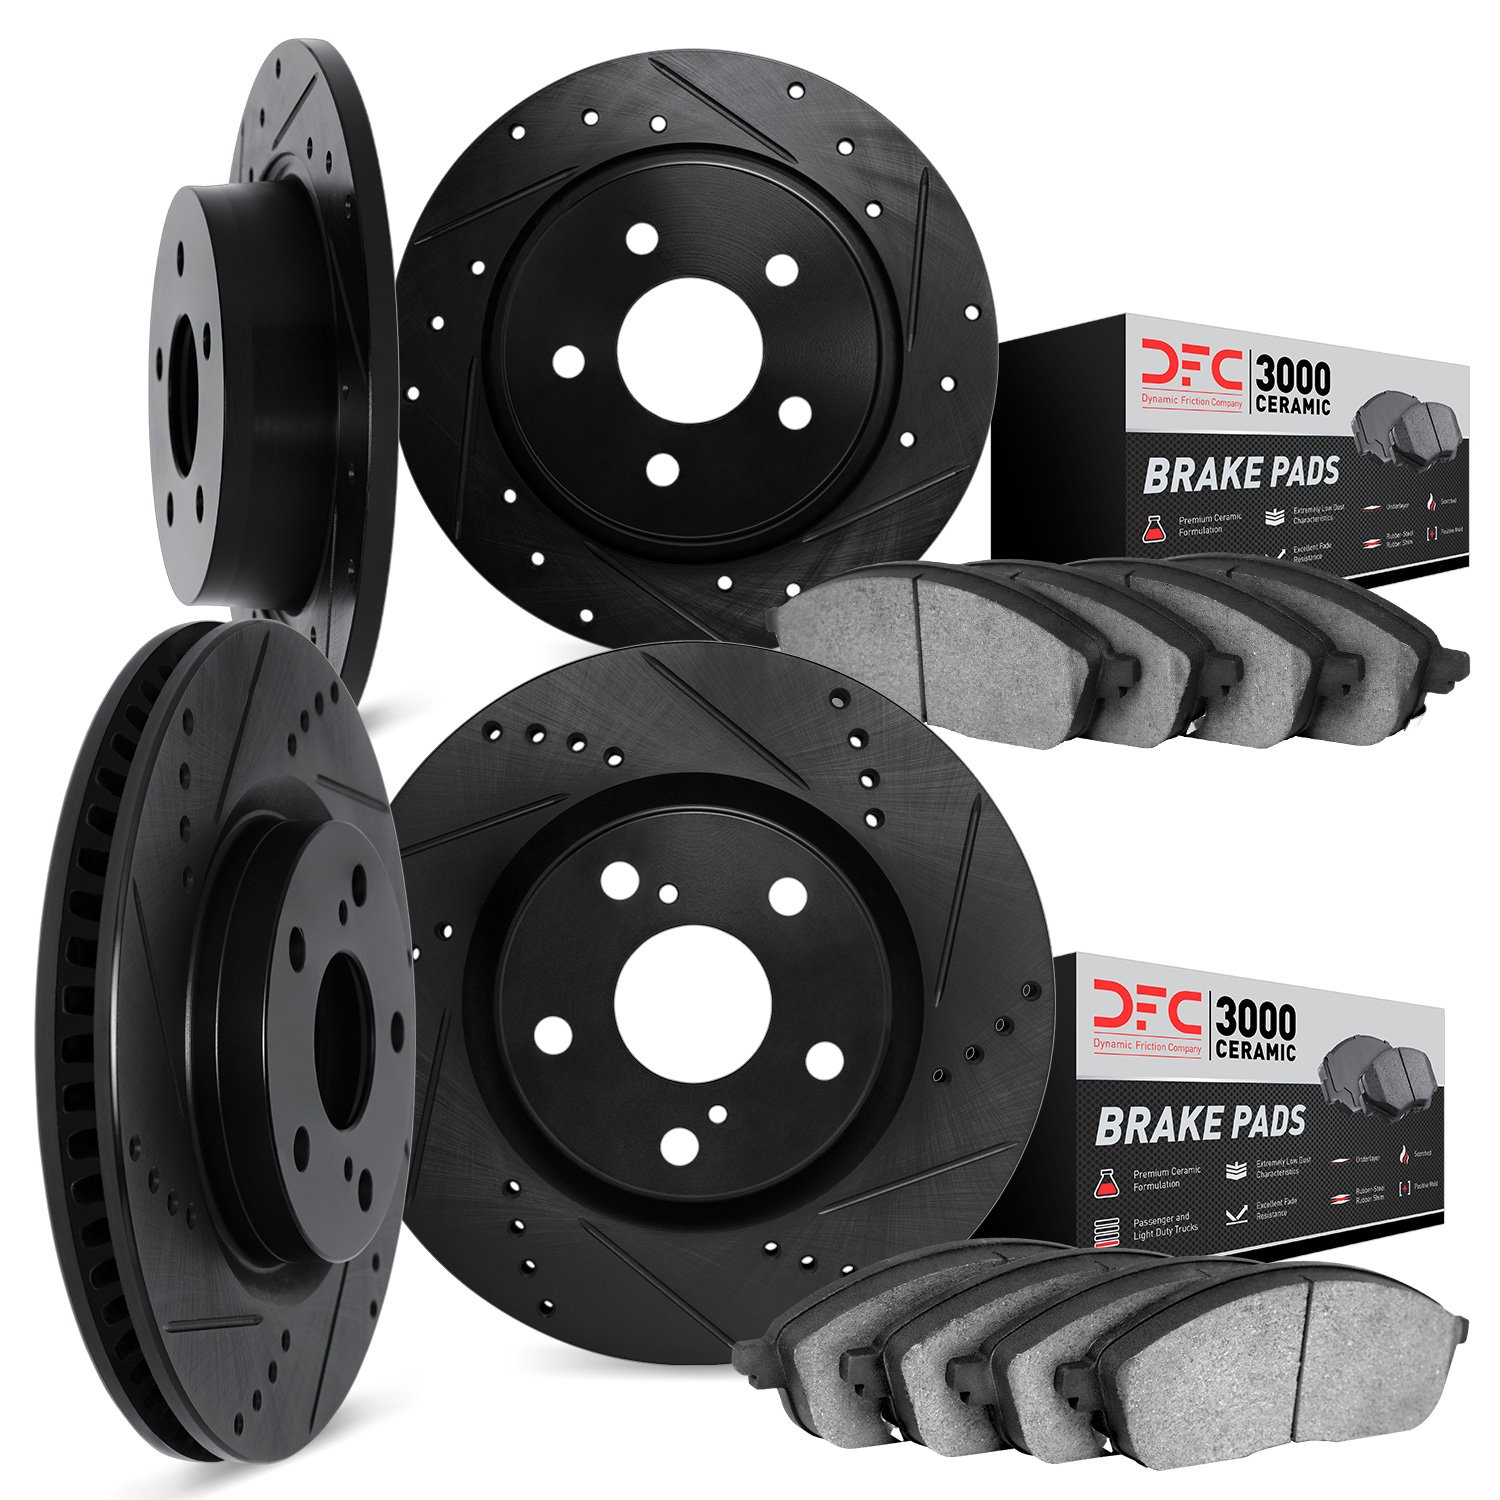 8304-39016 Drilled/Slotted Brake Rotors with 3000-Series Ceramic Brake Pads Kit [Black], 2004-2008 Mopar, Position: Front and Re